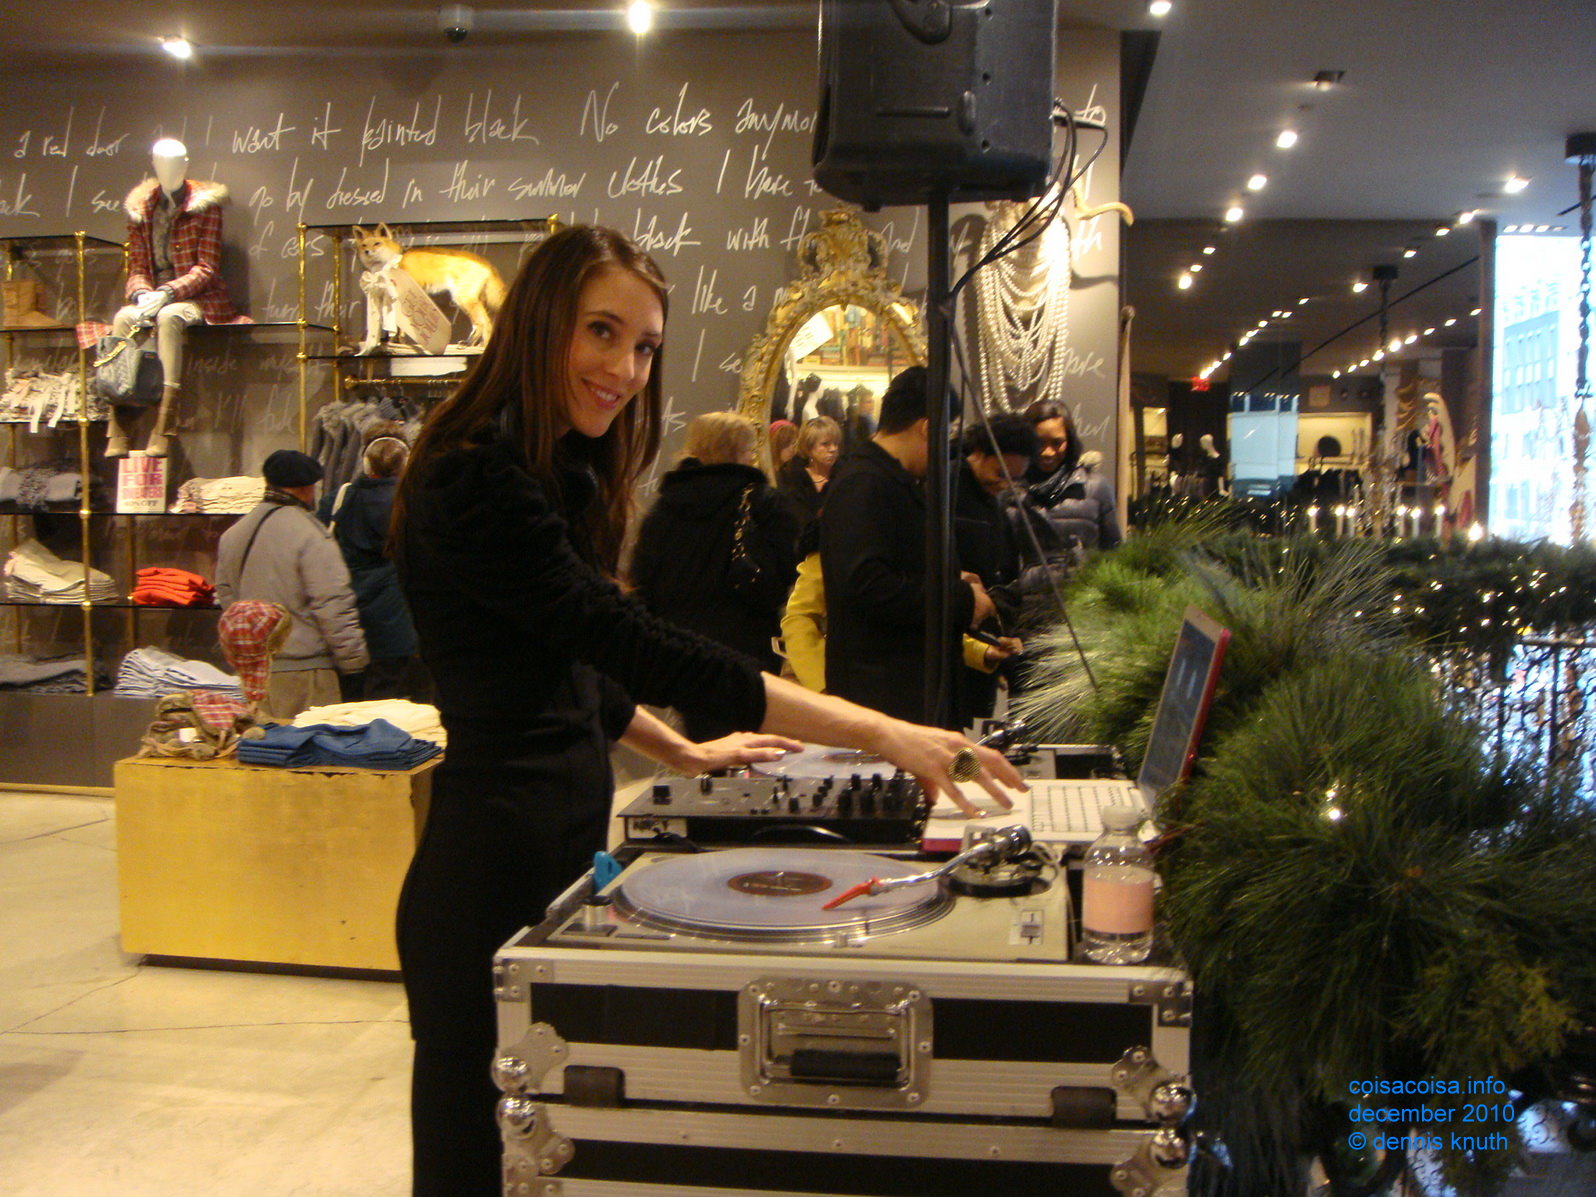 DJ spinning Christmas Songs for Shoppers in NY